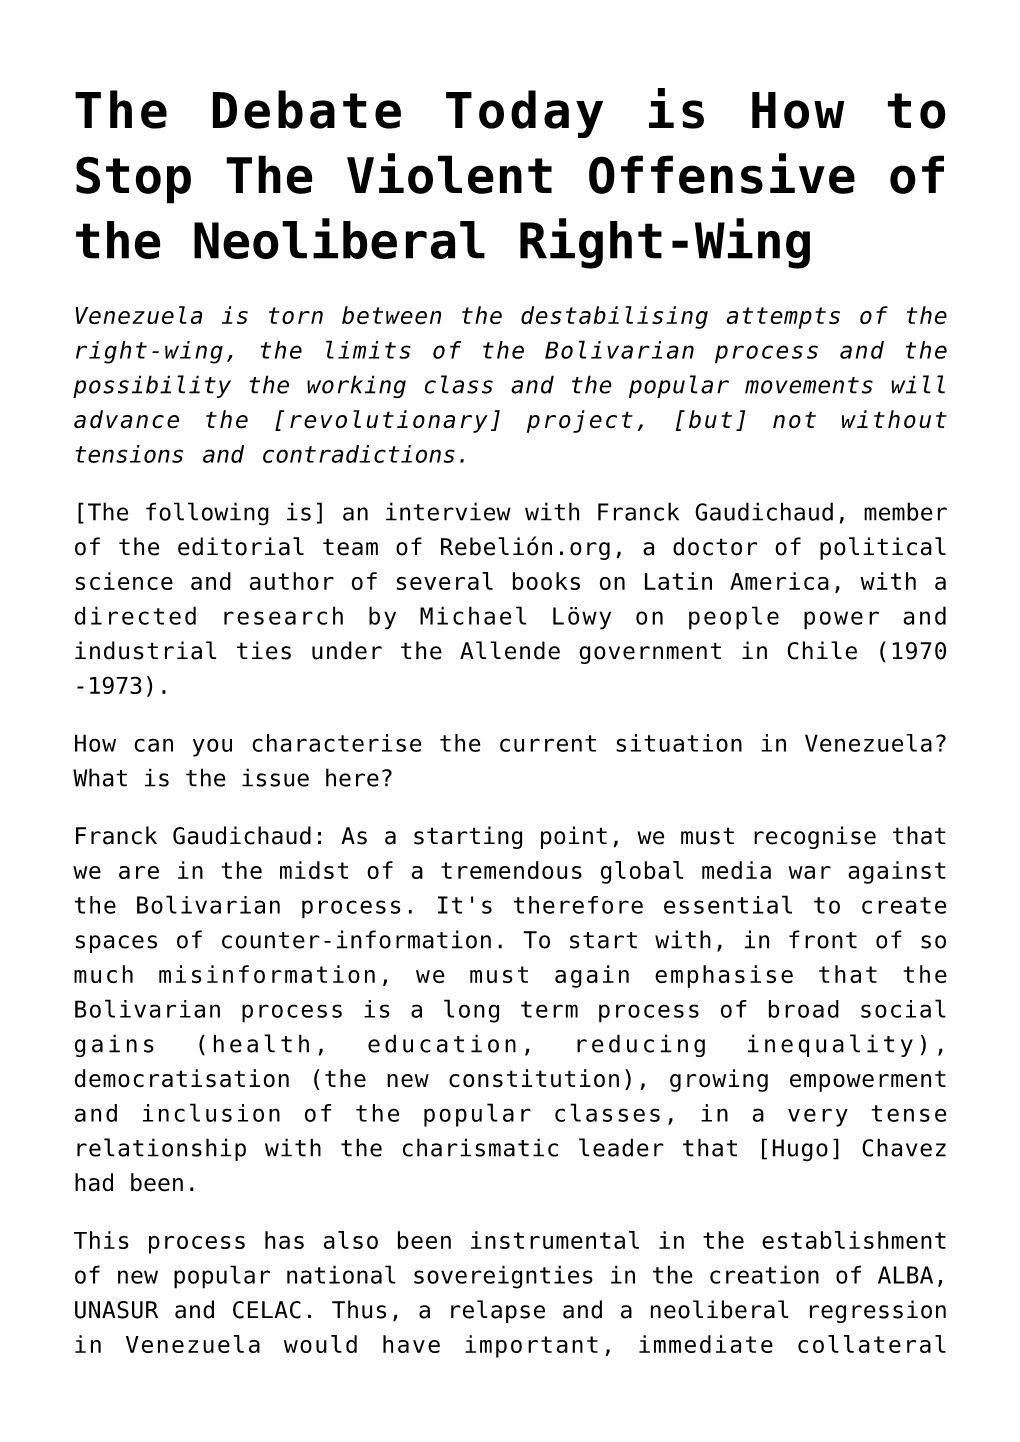 The Debate Today Is How to Stop the Violent Offensive of the Neoliberal Right-Wing